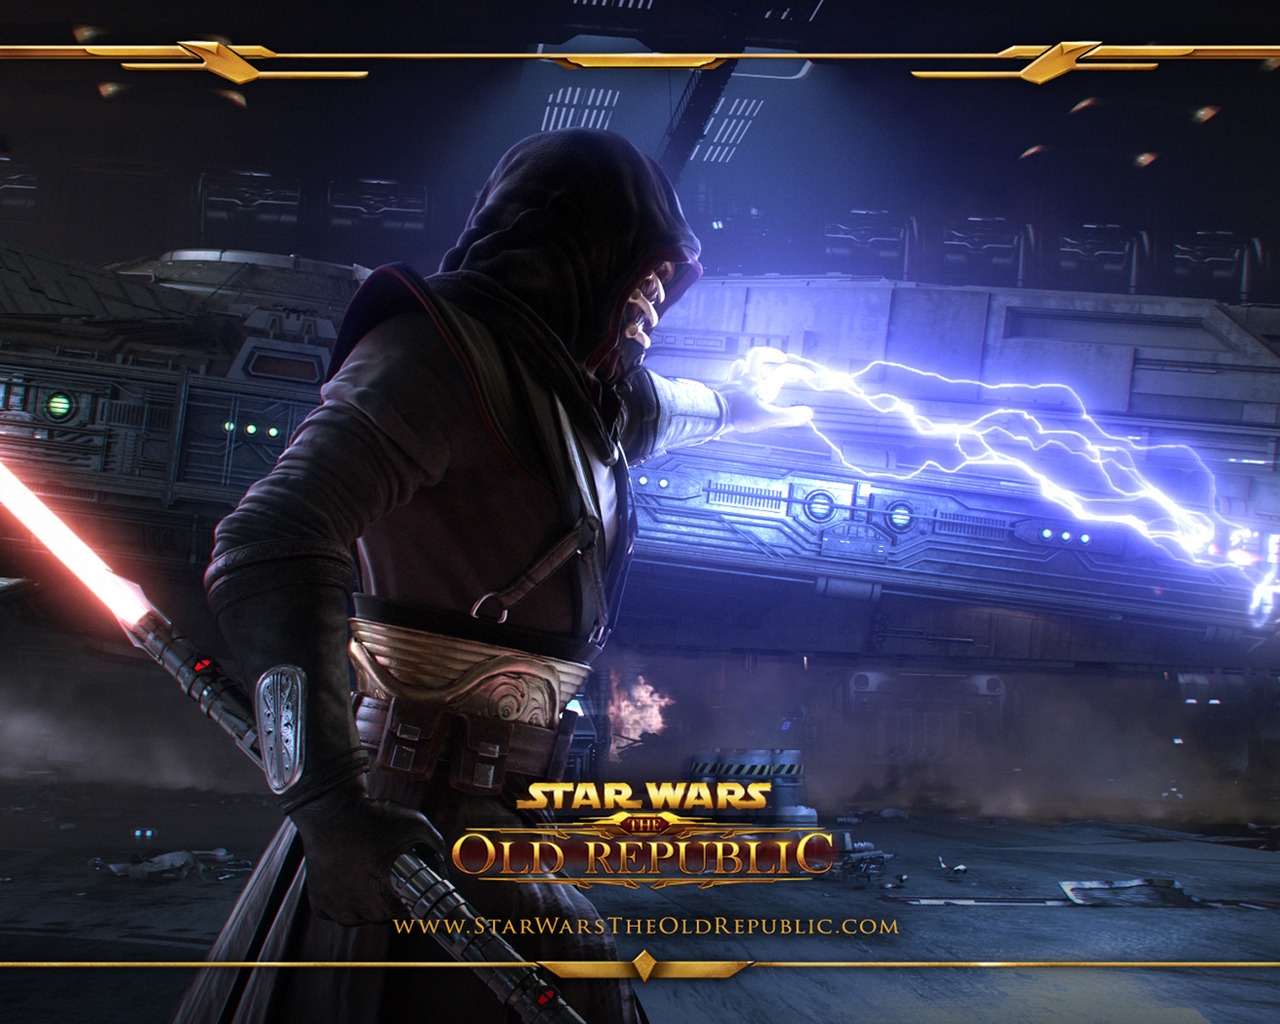 Star Wars The Old Republic for 1280 x 1024 resolution